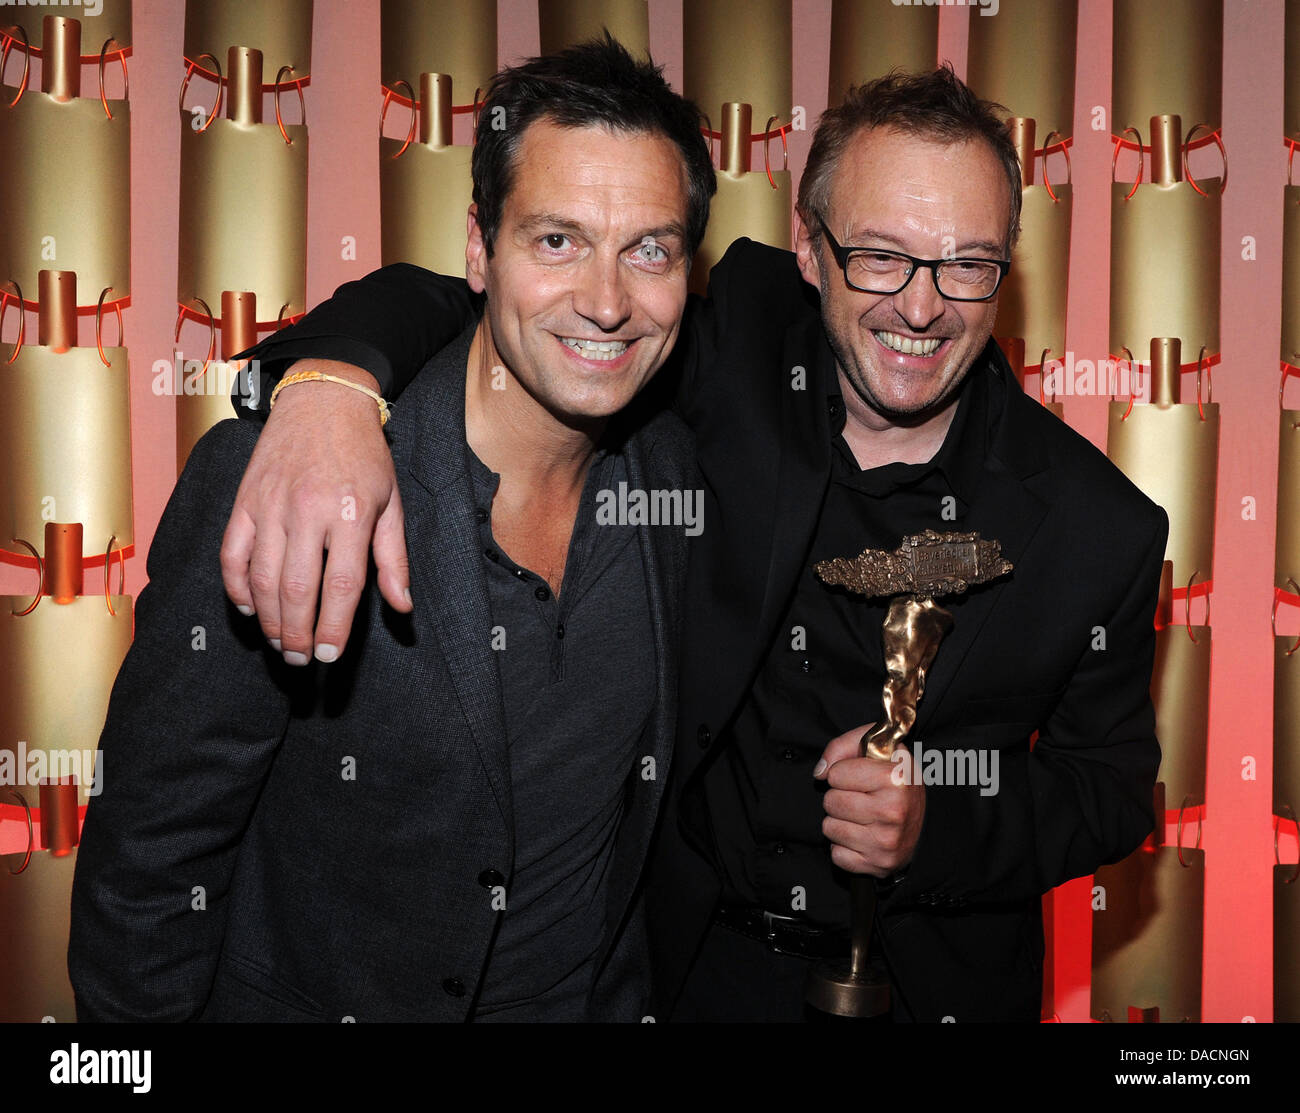 Austrian cabaret actor Josef Hader (r) and his laudator Dieter Nuhr cheer after receiving the main prize at the Bavarian Cabaret Prize awards in Munich, Germany, 27 September 2011. Since 1999, the prize is anually awarded to artists from German-speaking countries in four different categories. The ceremony will be broadcasted on Bavarian Television TV channel on 7 October at 22:30.  Stock Photo